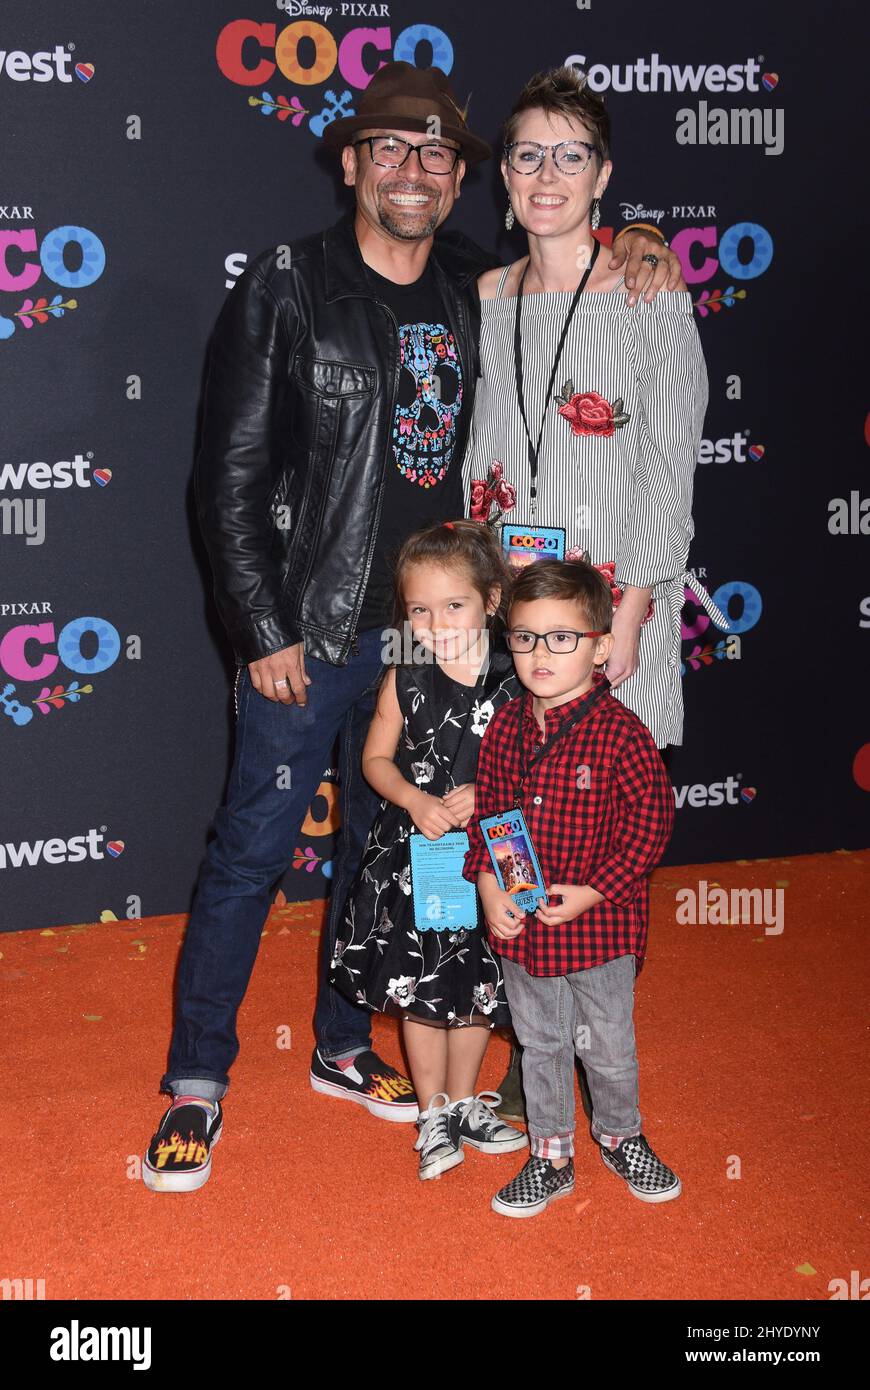 Lombardo Boyar attending the premiere of Coco in West Hollywood, California Stock Photo